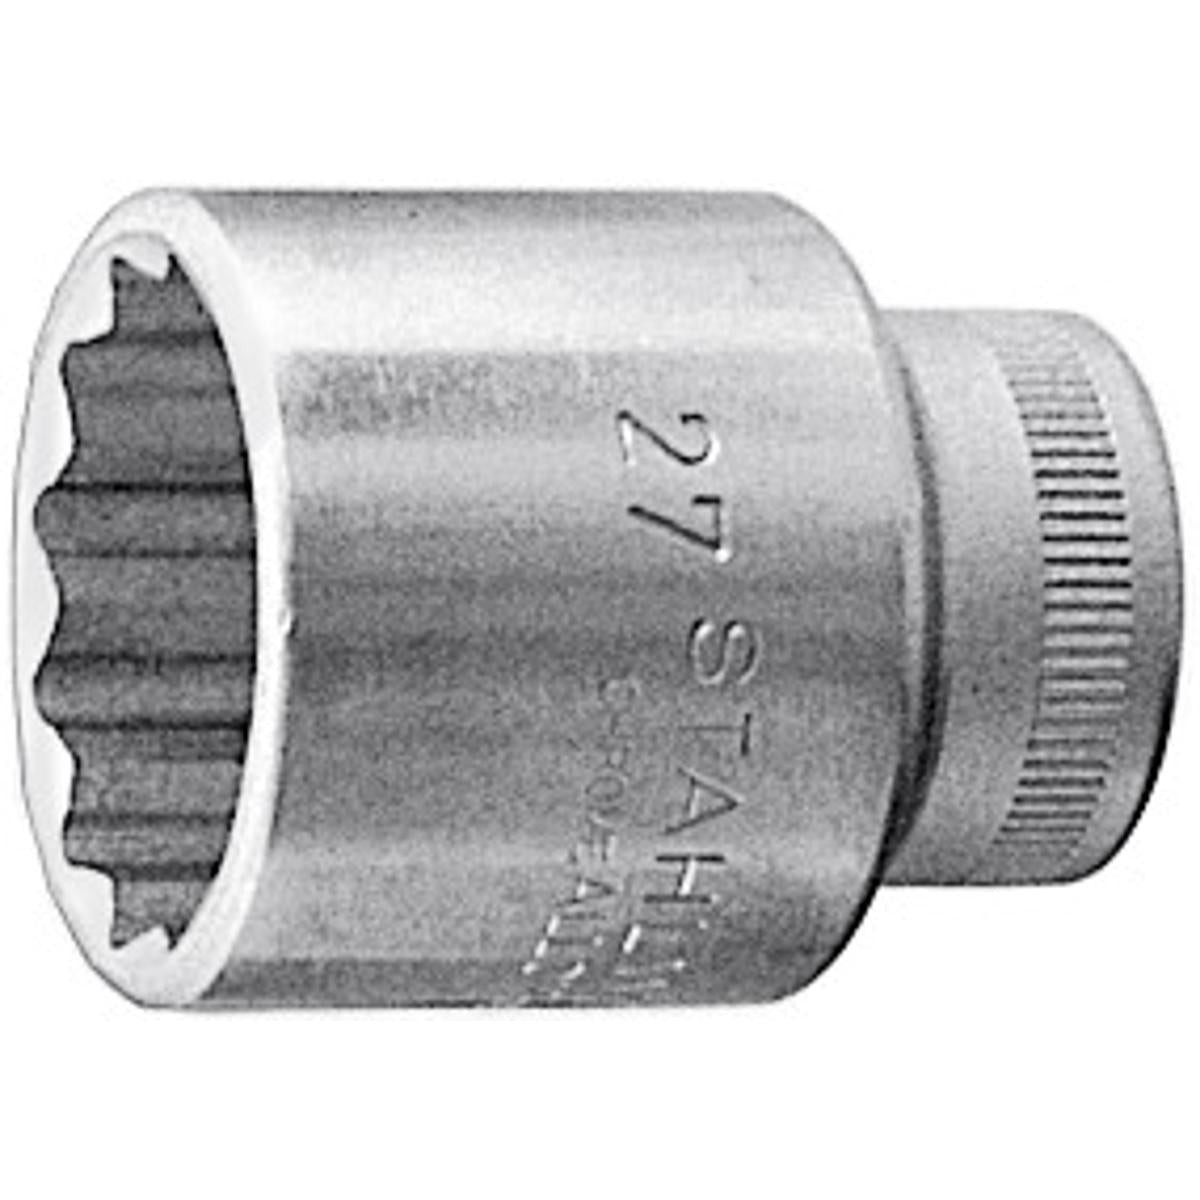 ĐẦU SOCKET 12 CẠNH, 1/2 INCH STAHLWILLE 19MM